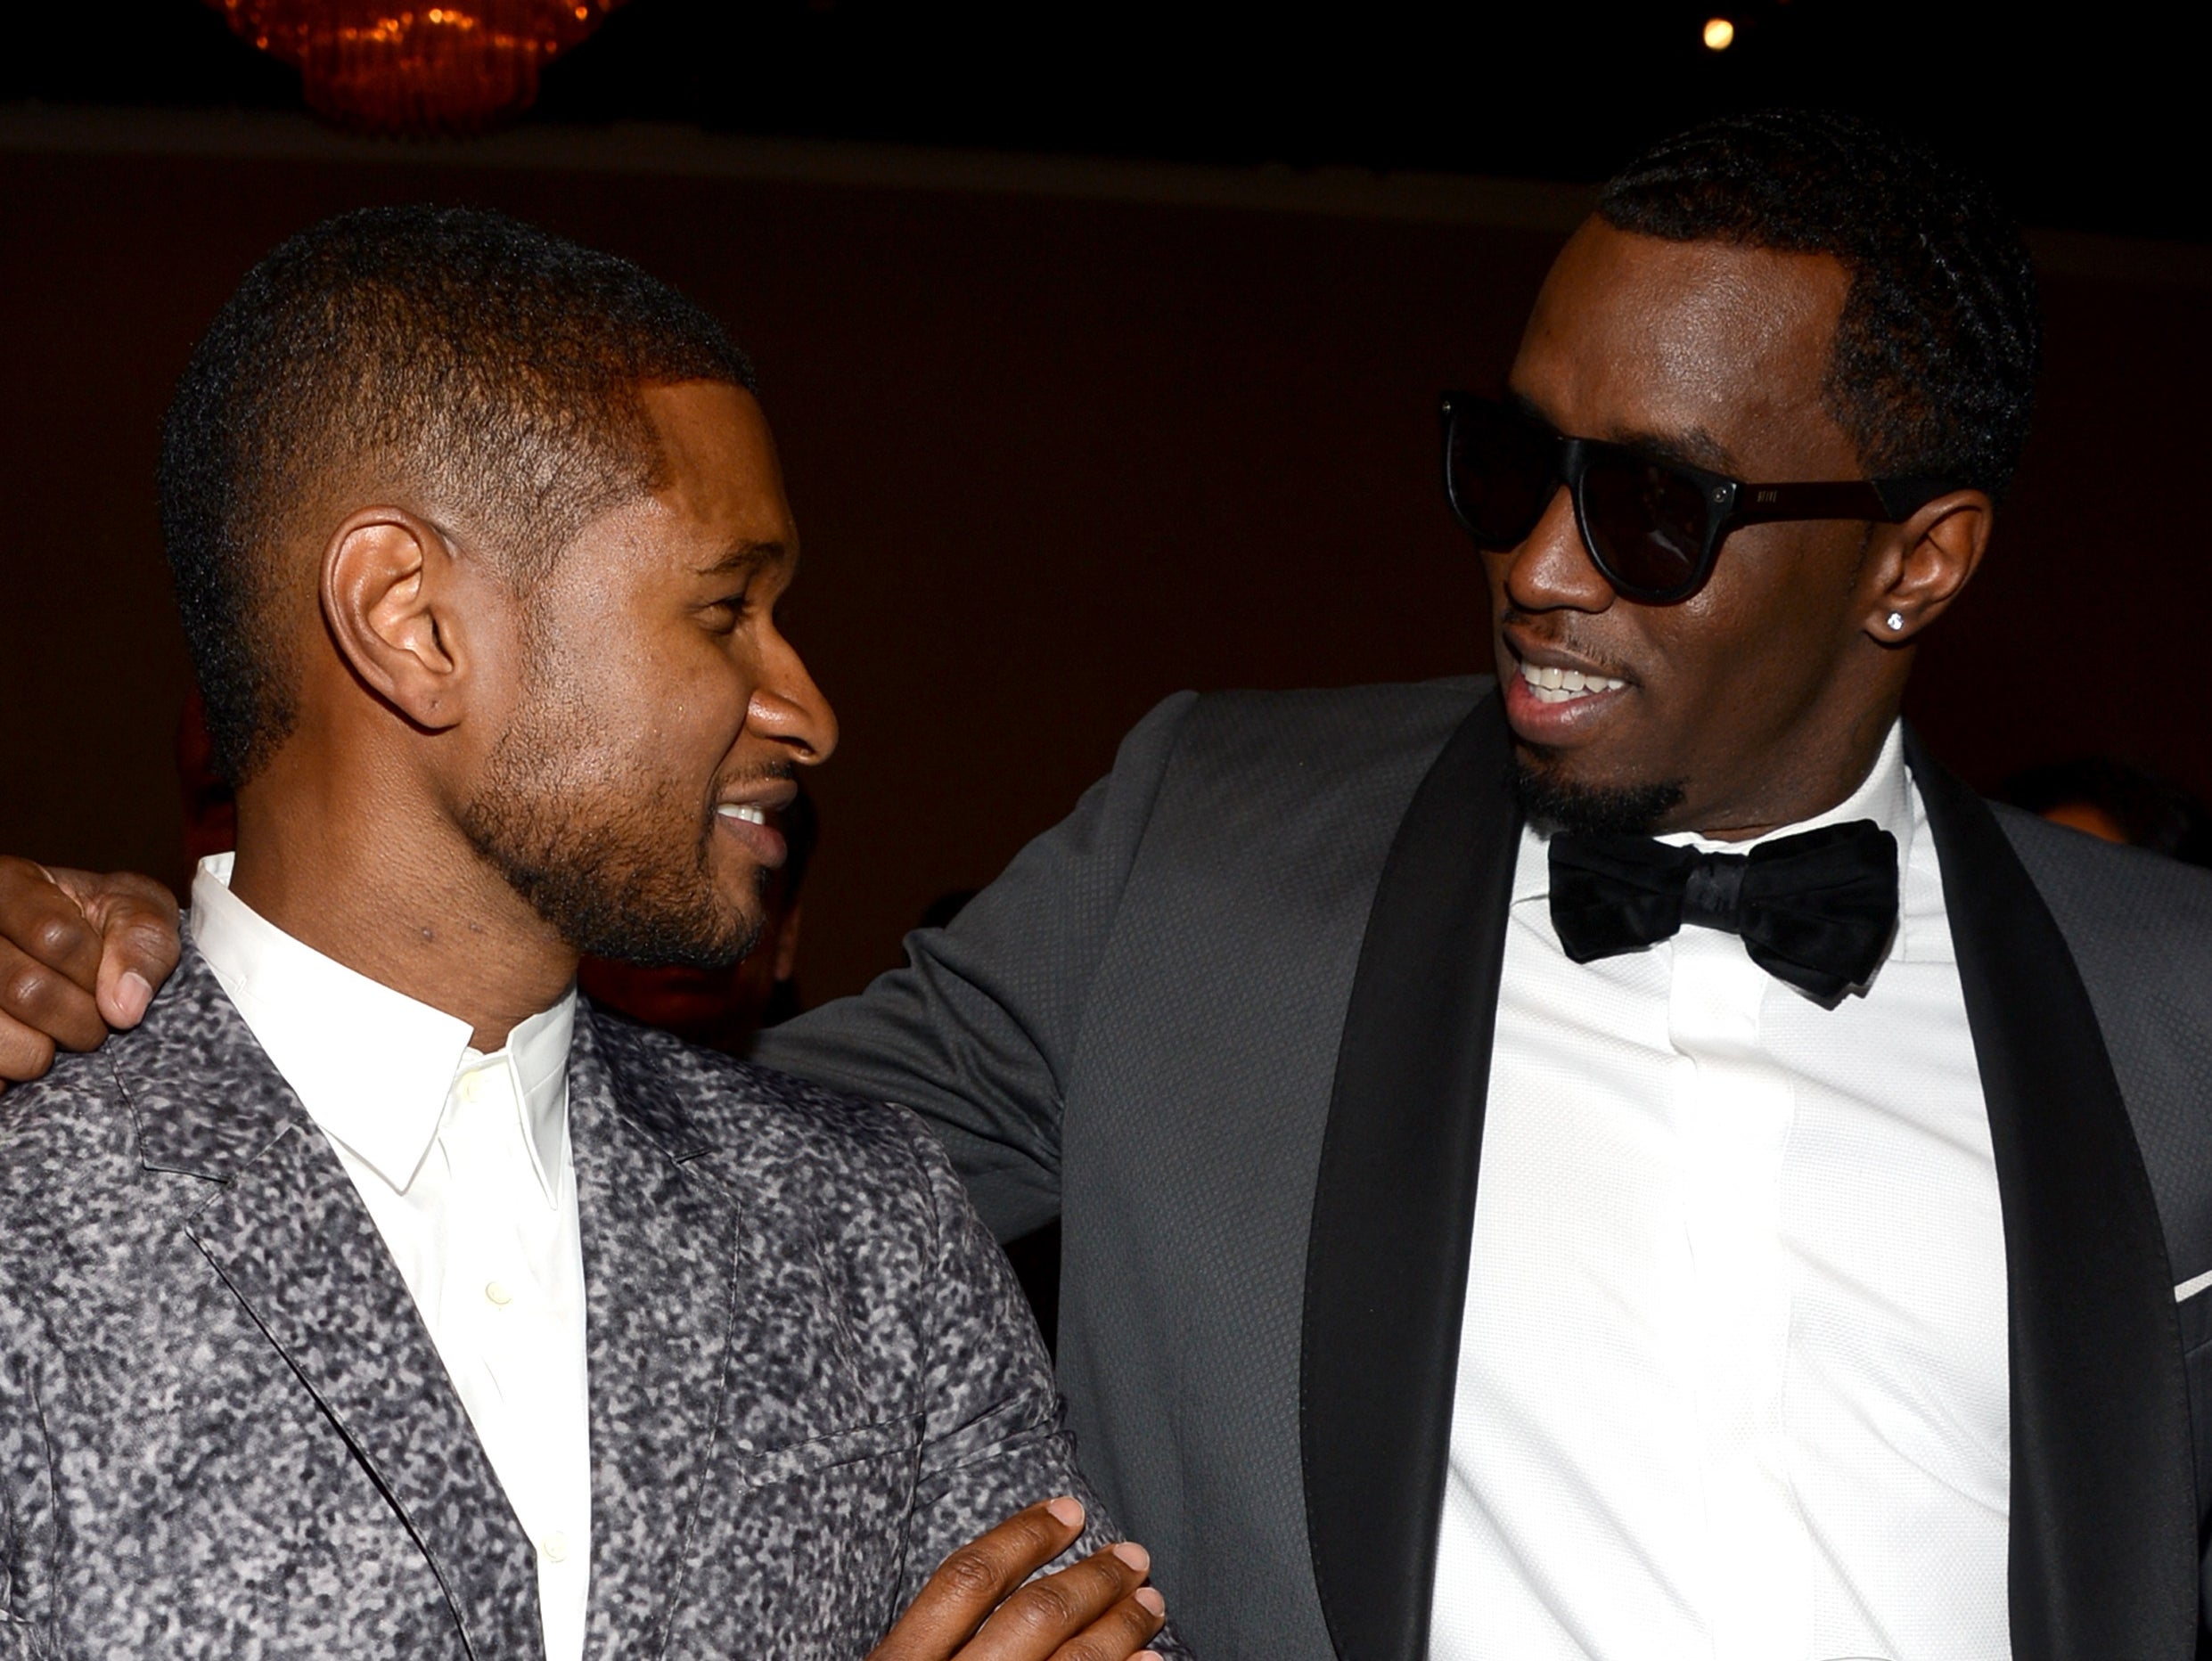 Usher and Diddy at the Grammy Awards pre-party honouring LA Reid, 2013